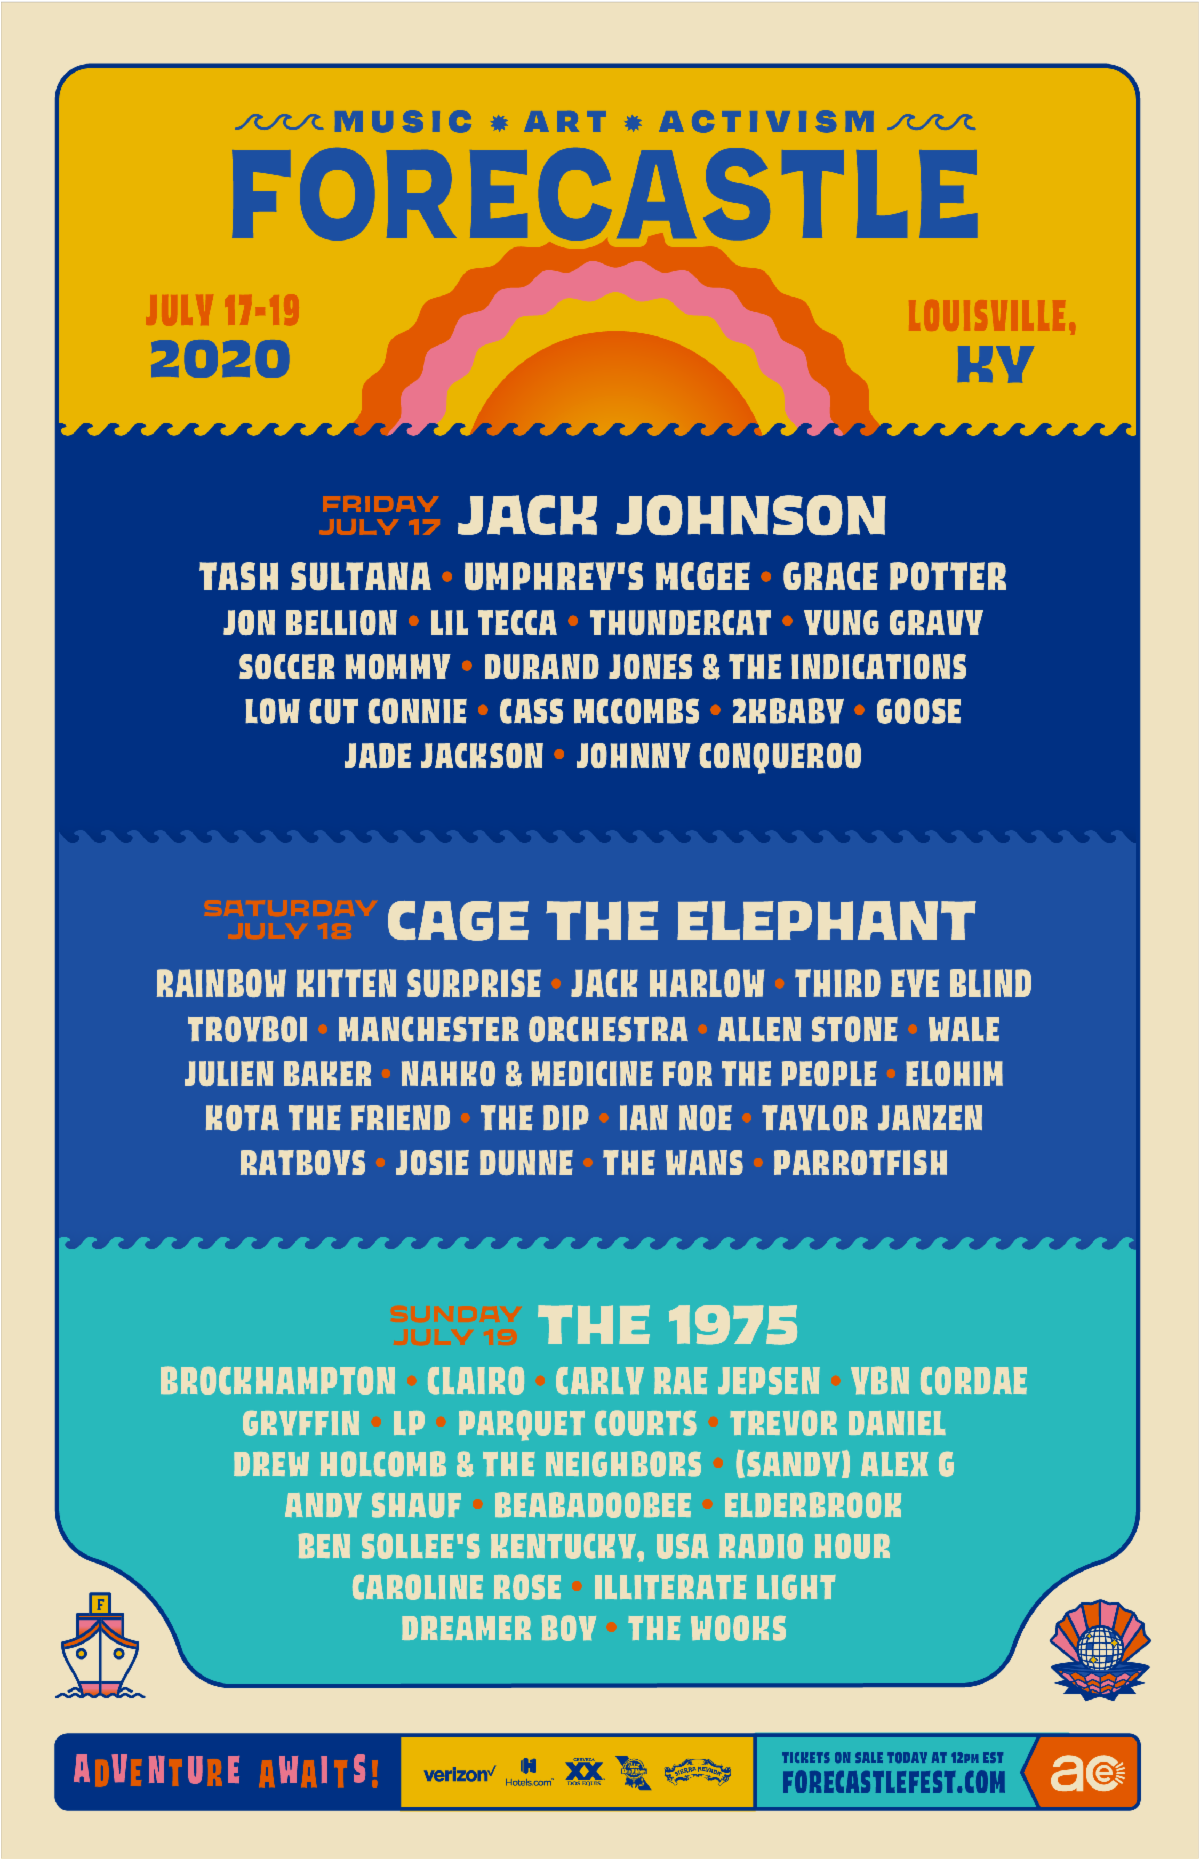 Forecastle 2020 lineup in Louisville